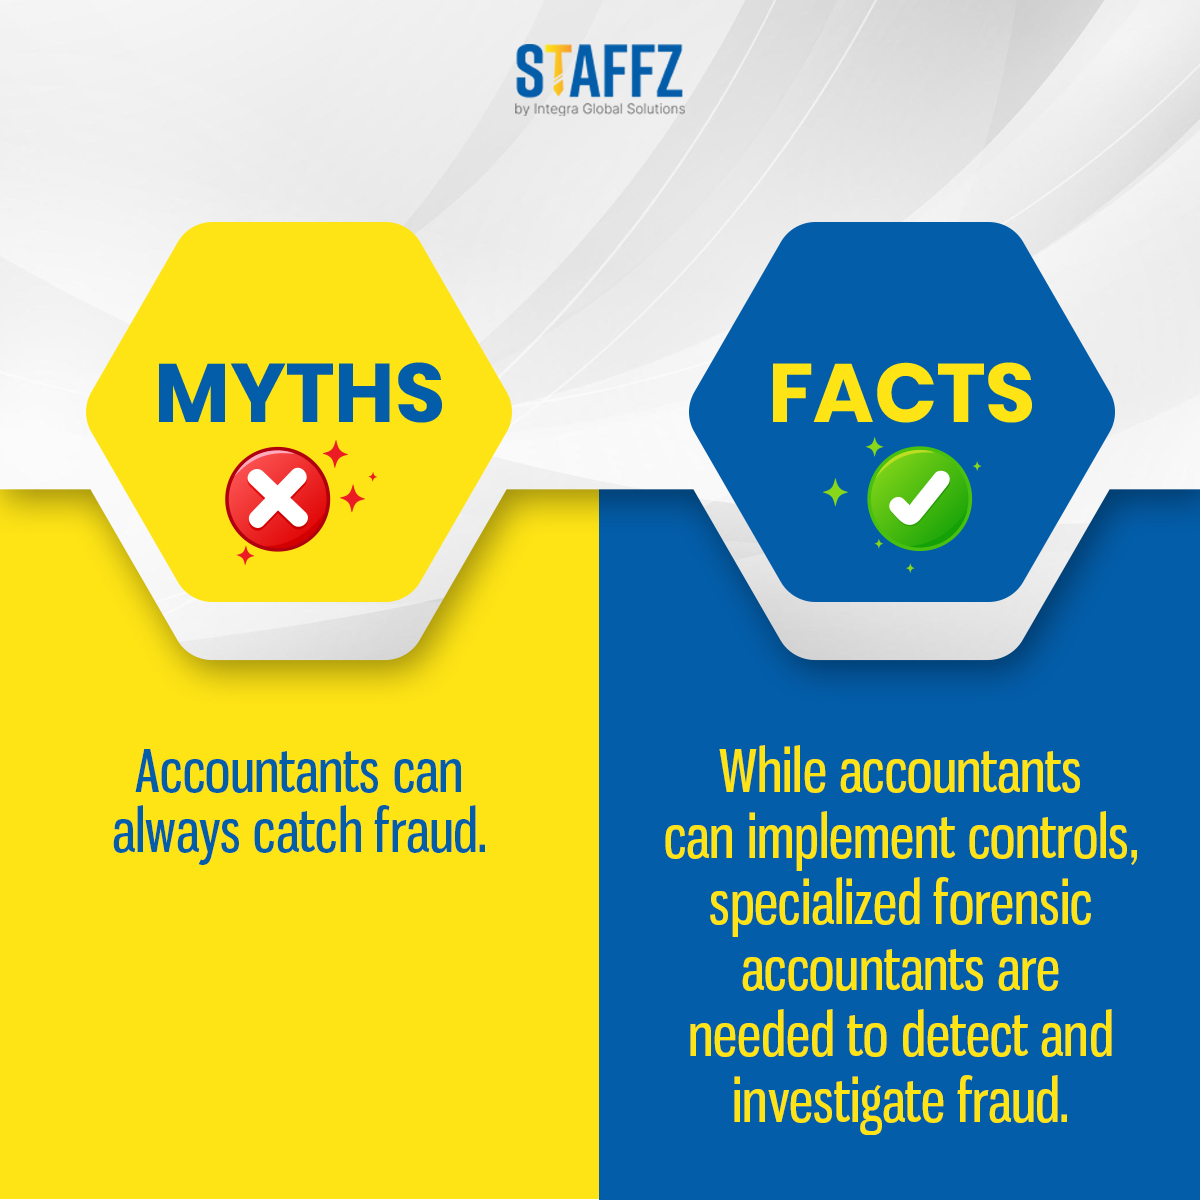 🔍🚫 Myth: Accountants always catch fraud.
💡 Fact: Accountants set controls, but for real sleuthing skills, you need specialized forensic accountants. They're the fraud-busting heroes we all need! 
.
.
#AccountantLife #FraudBusters #ForensicAccounting #MythVsFact #staffz #myths